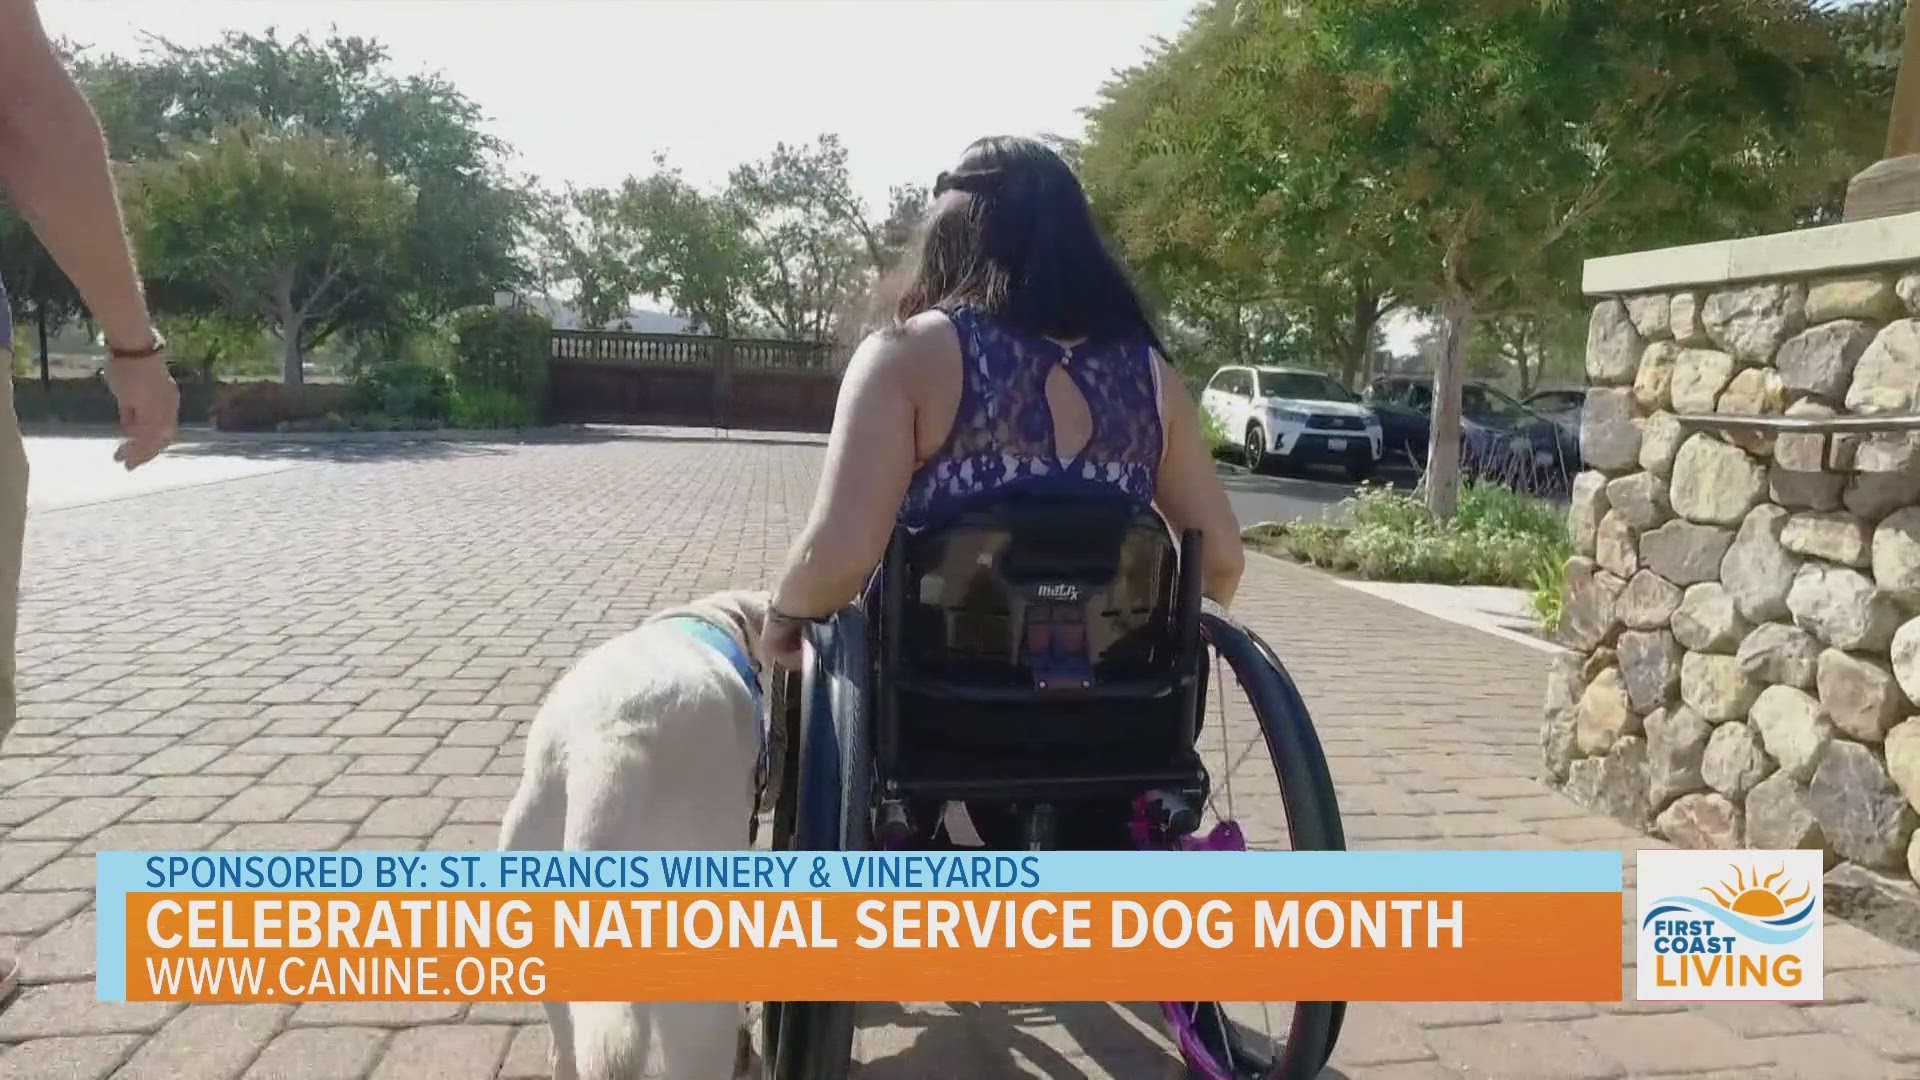 Canine Companions is a non-profit organization that enhances the lives of people with disabilities by providing expertly trained service dogs and ongoing support.